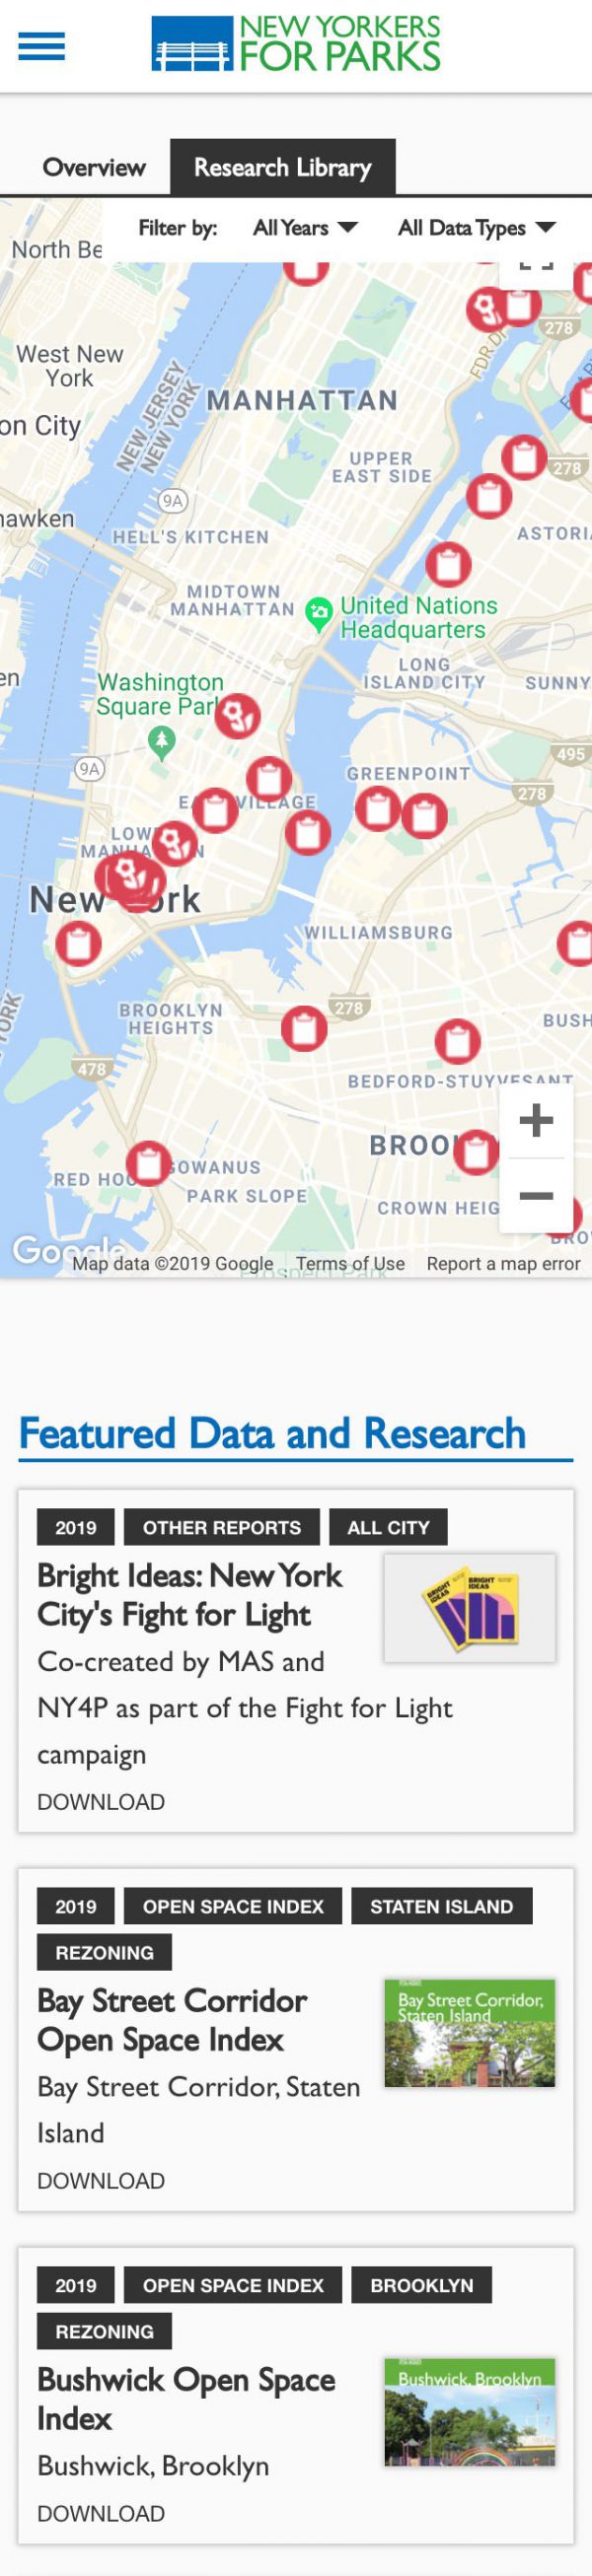 Screenshot of the New Yorkers for Parks website's Data and Research Library page